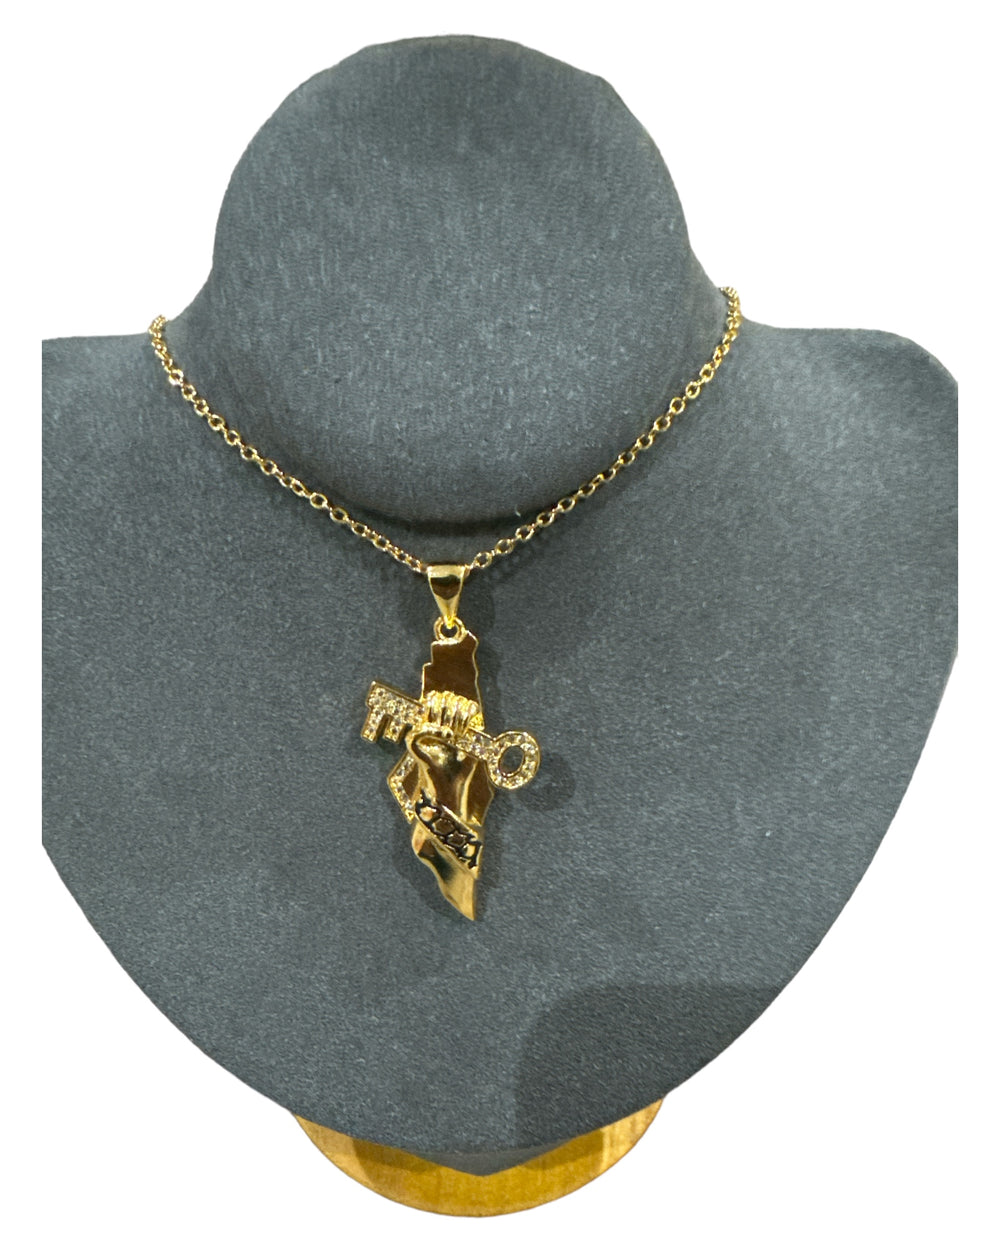 Strength and Legacy: Gold Palestine Map Necklace with Crystal Key & Keffiyeh Accent